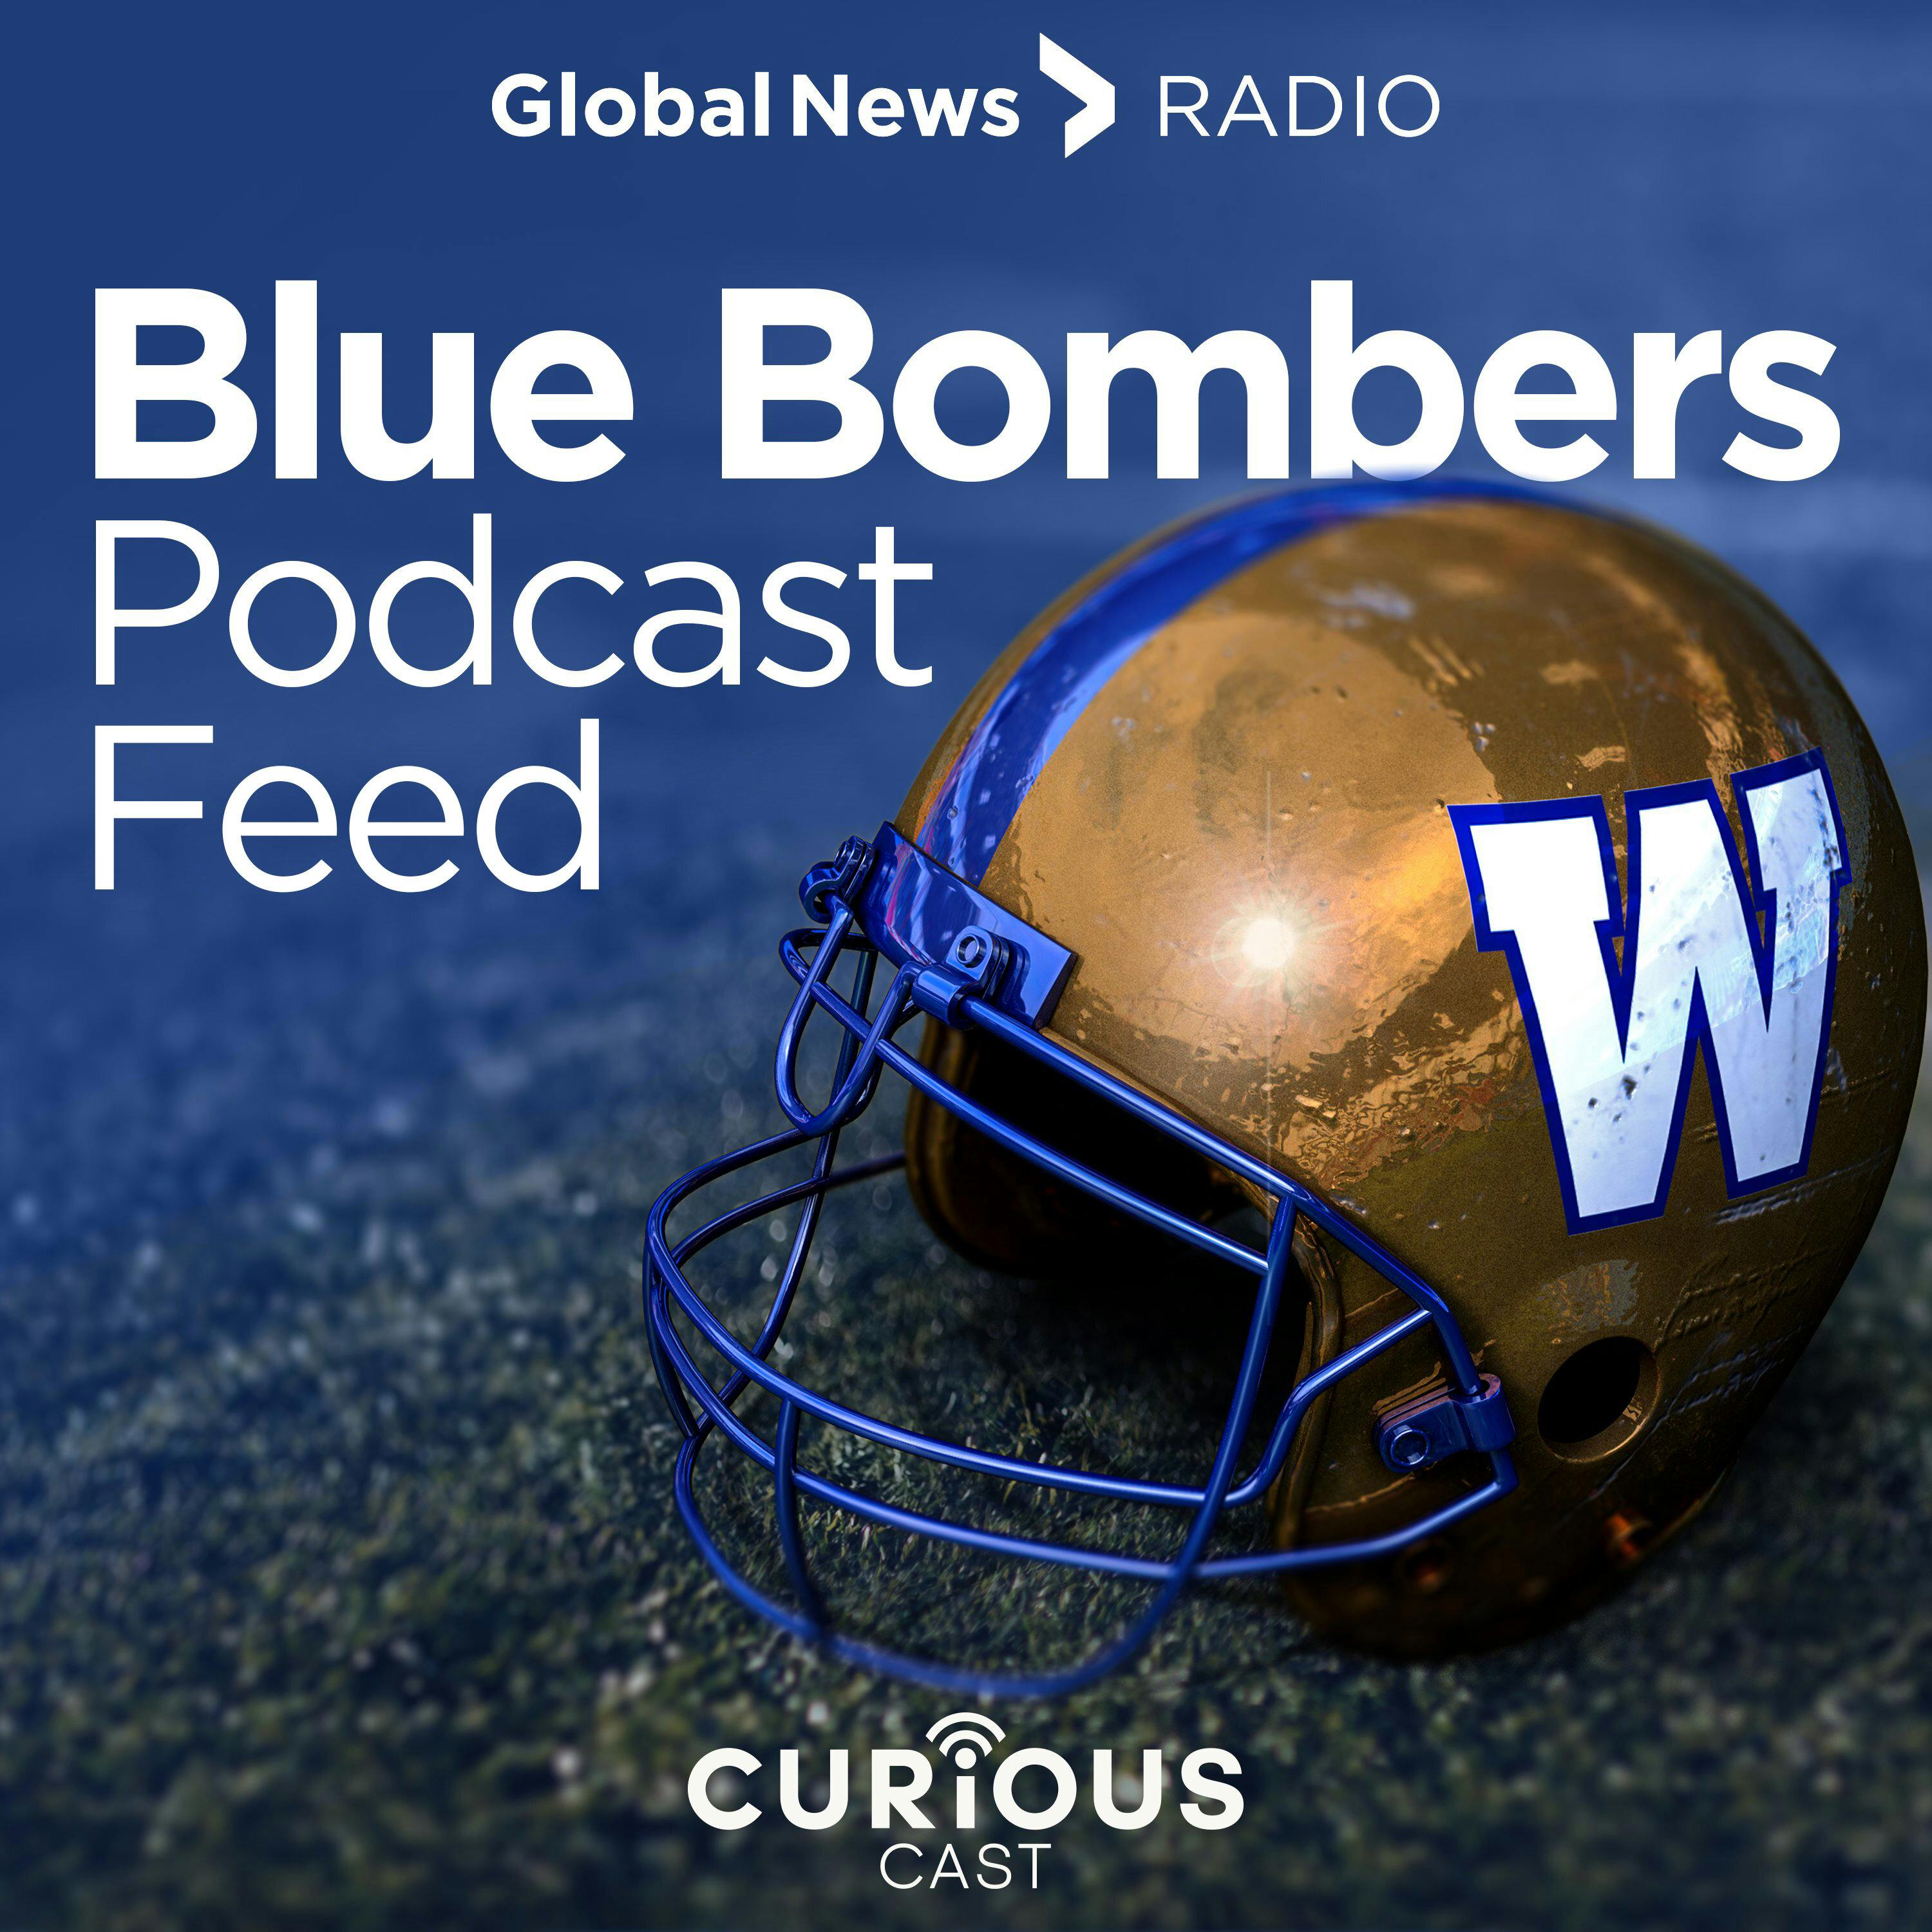 The Blue Bombers Podcast Feed